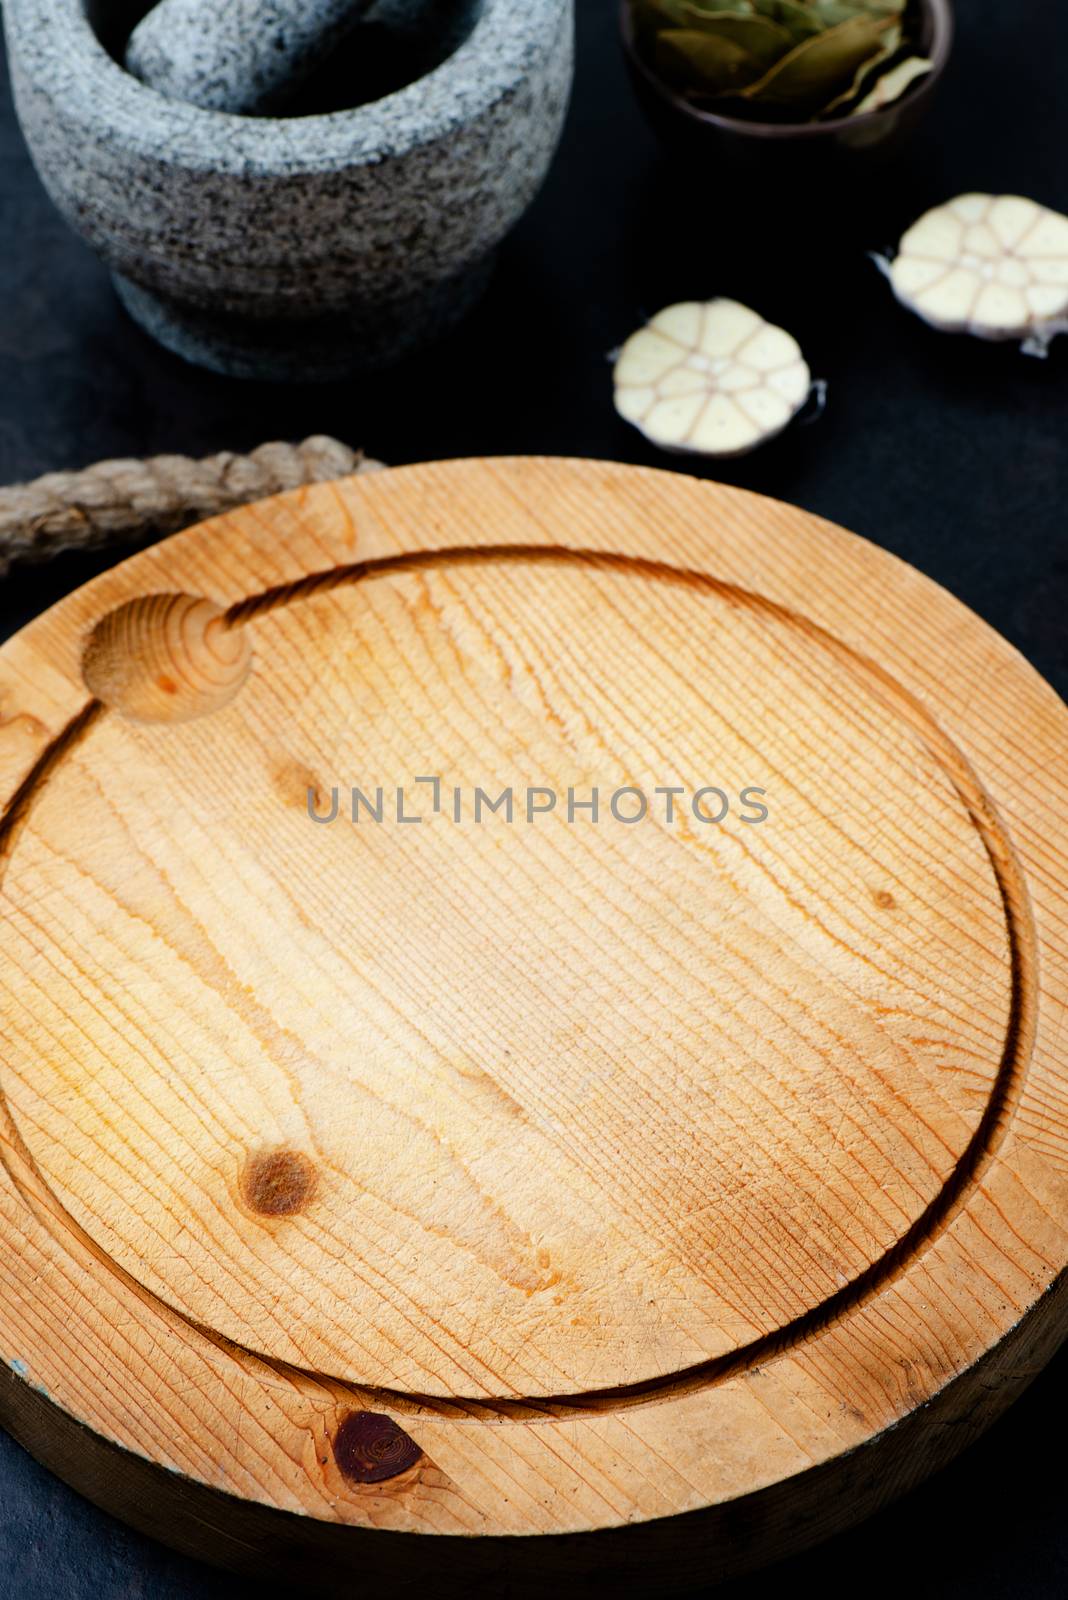 Stone mortar bowl with pestle, garlic, bay leaf and wooden cutting board on stone surface